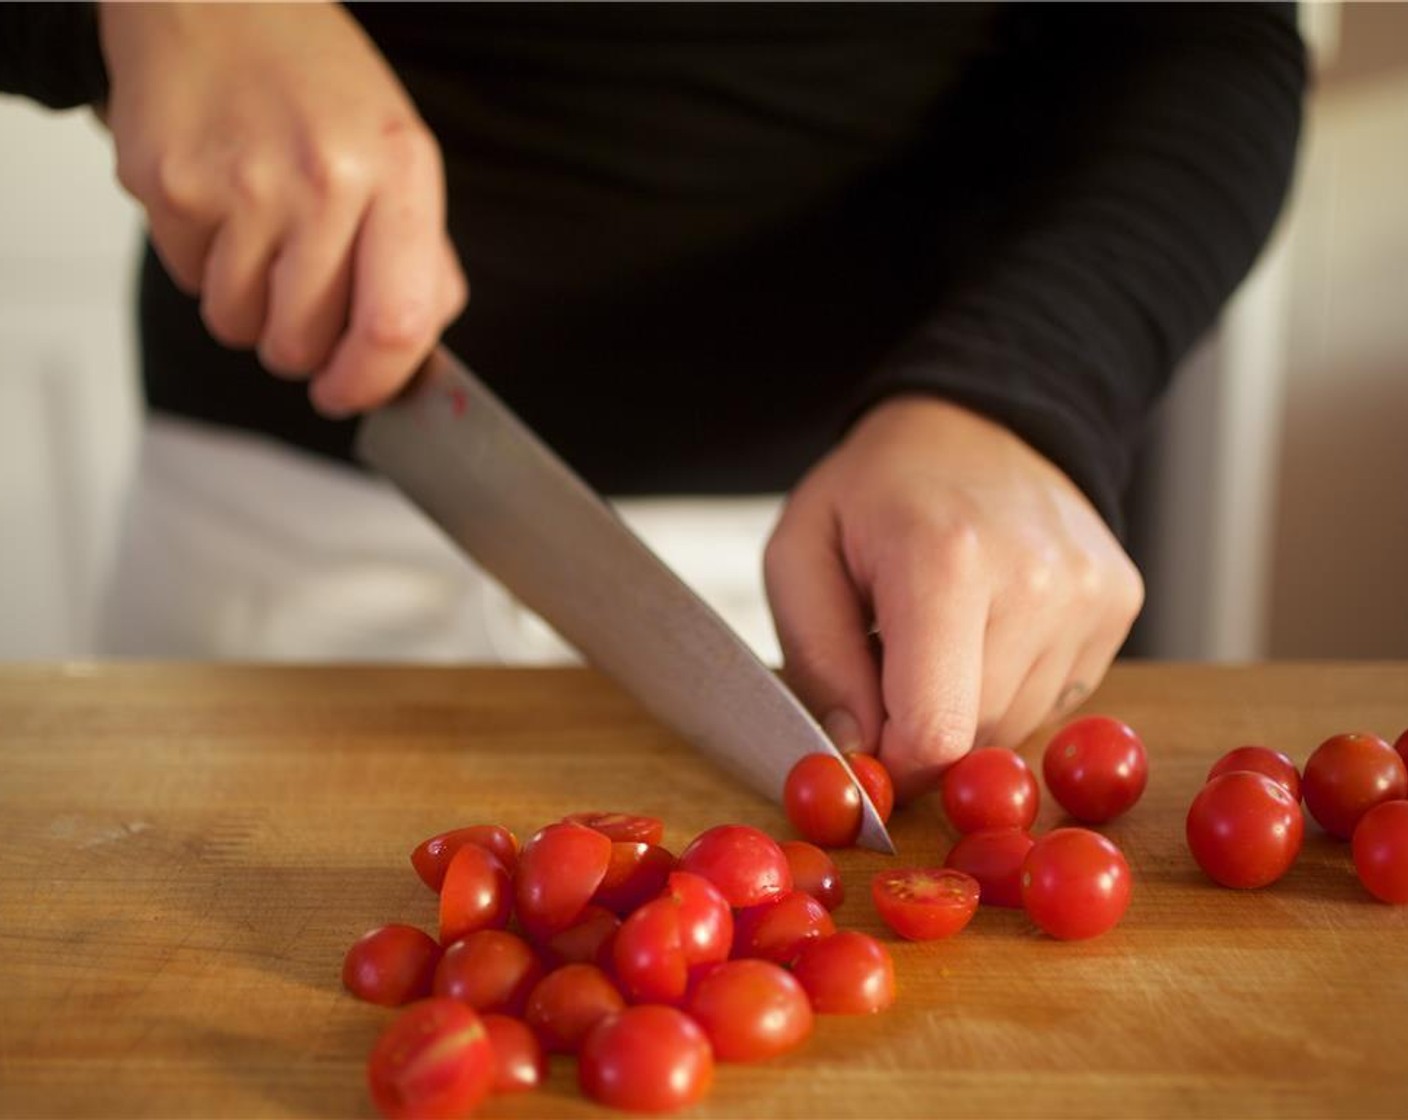 step 2 Cut Garlic (2 cloves) into quarter inch slices lengthwise, and set aside. Slice Cherry Tomato (1 cup) in half, and set aside. In a small bowl, mix together one cup of water and Chicken Base (1 pckg).